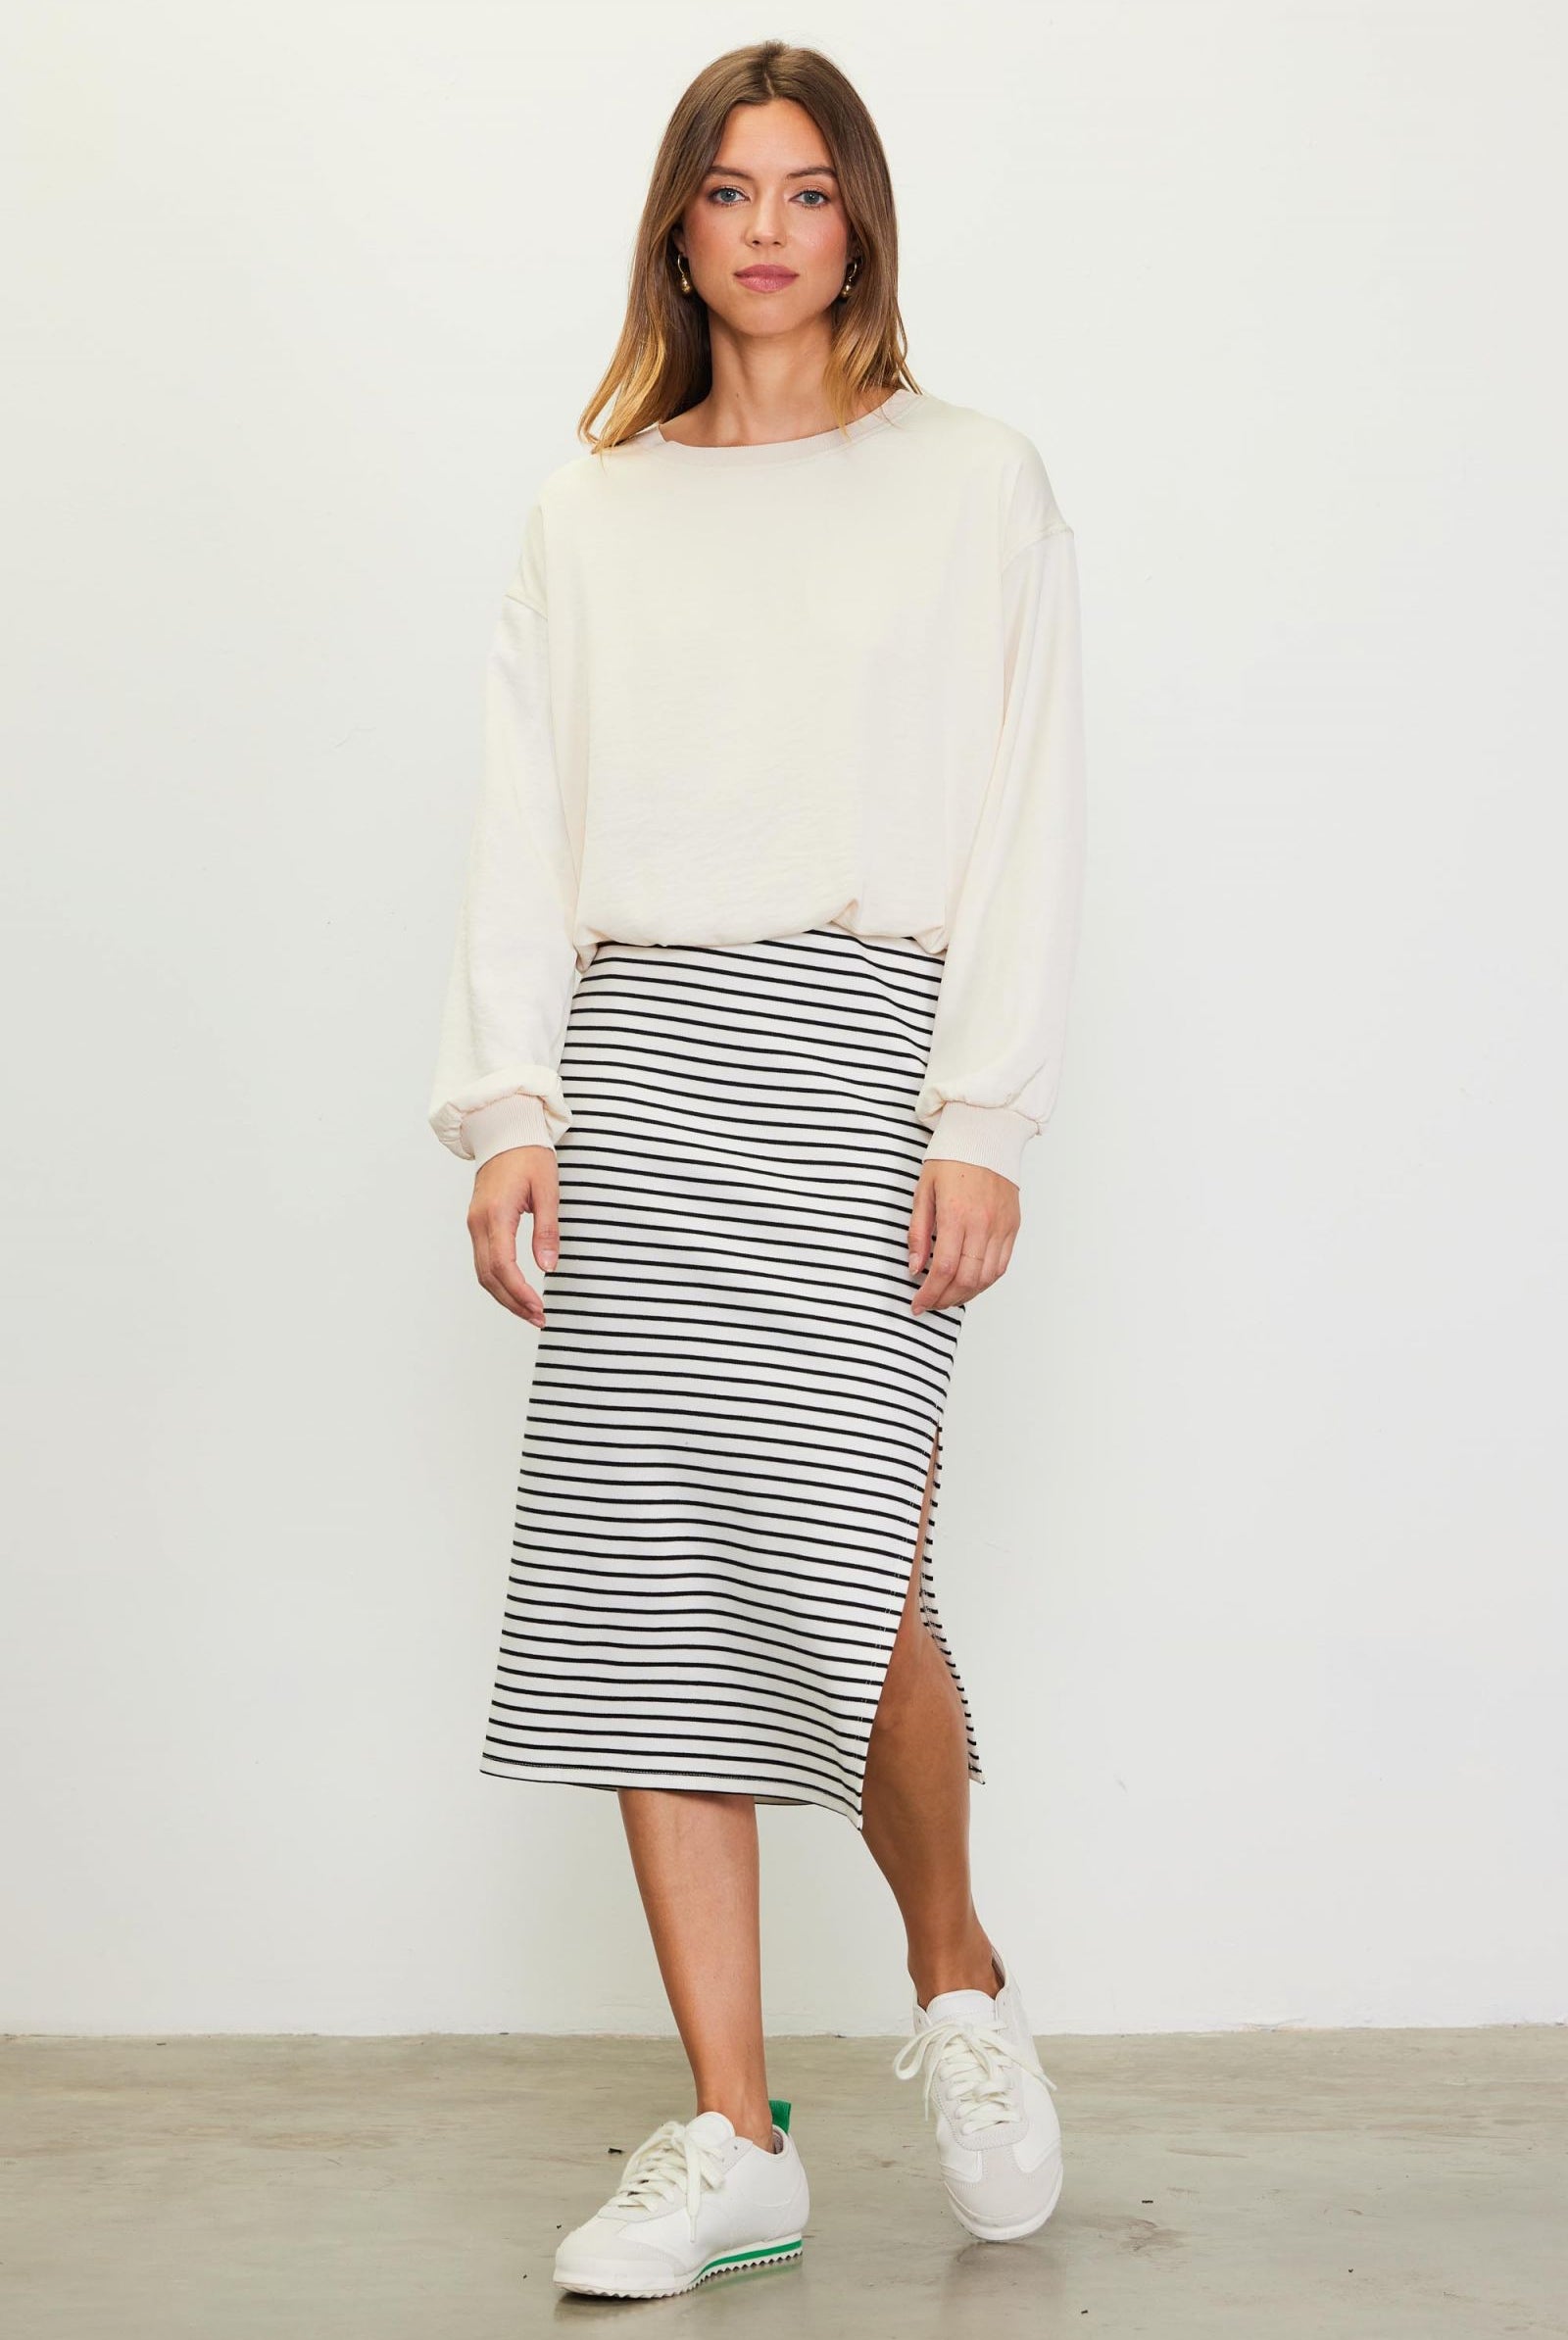 Monica Striped Skirt-Skirts-Vixen Collection, Day Spa and Women's Boutique Located in Seattle, Washington